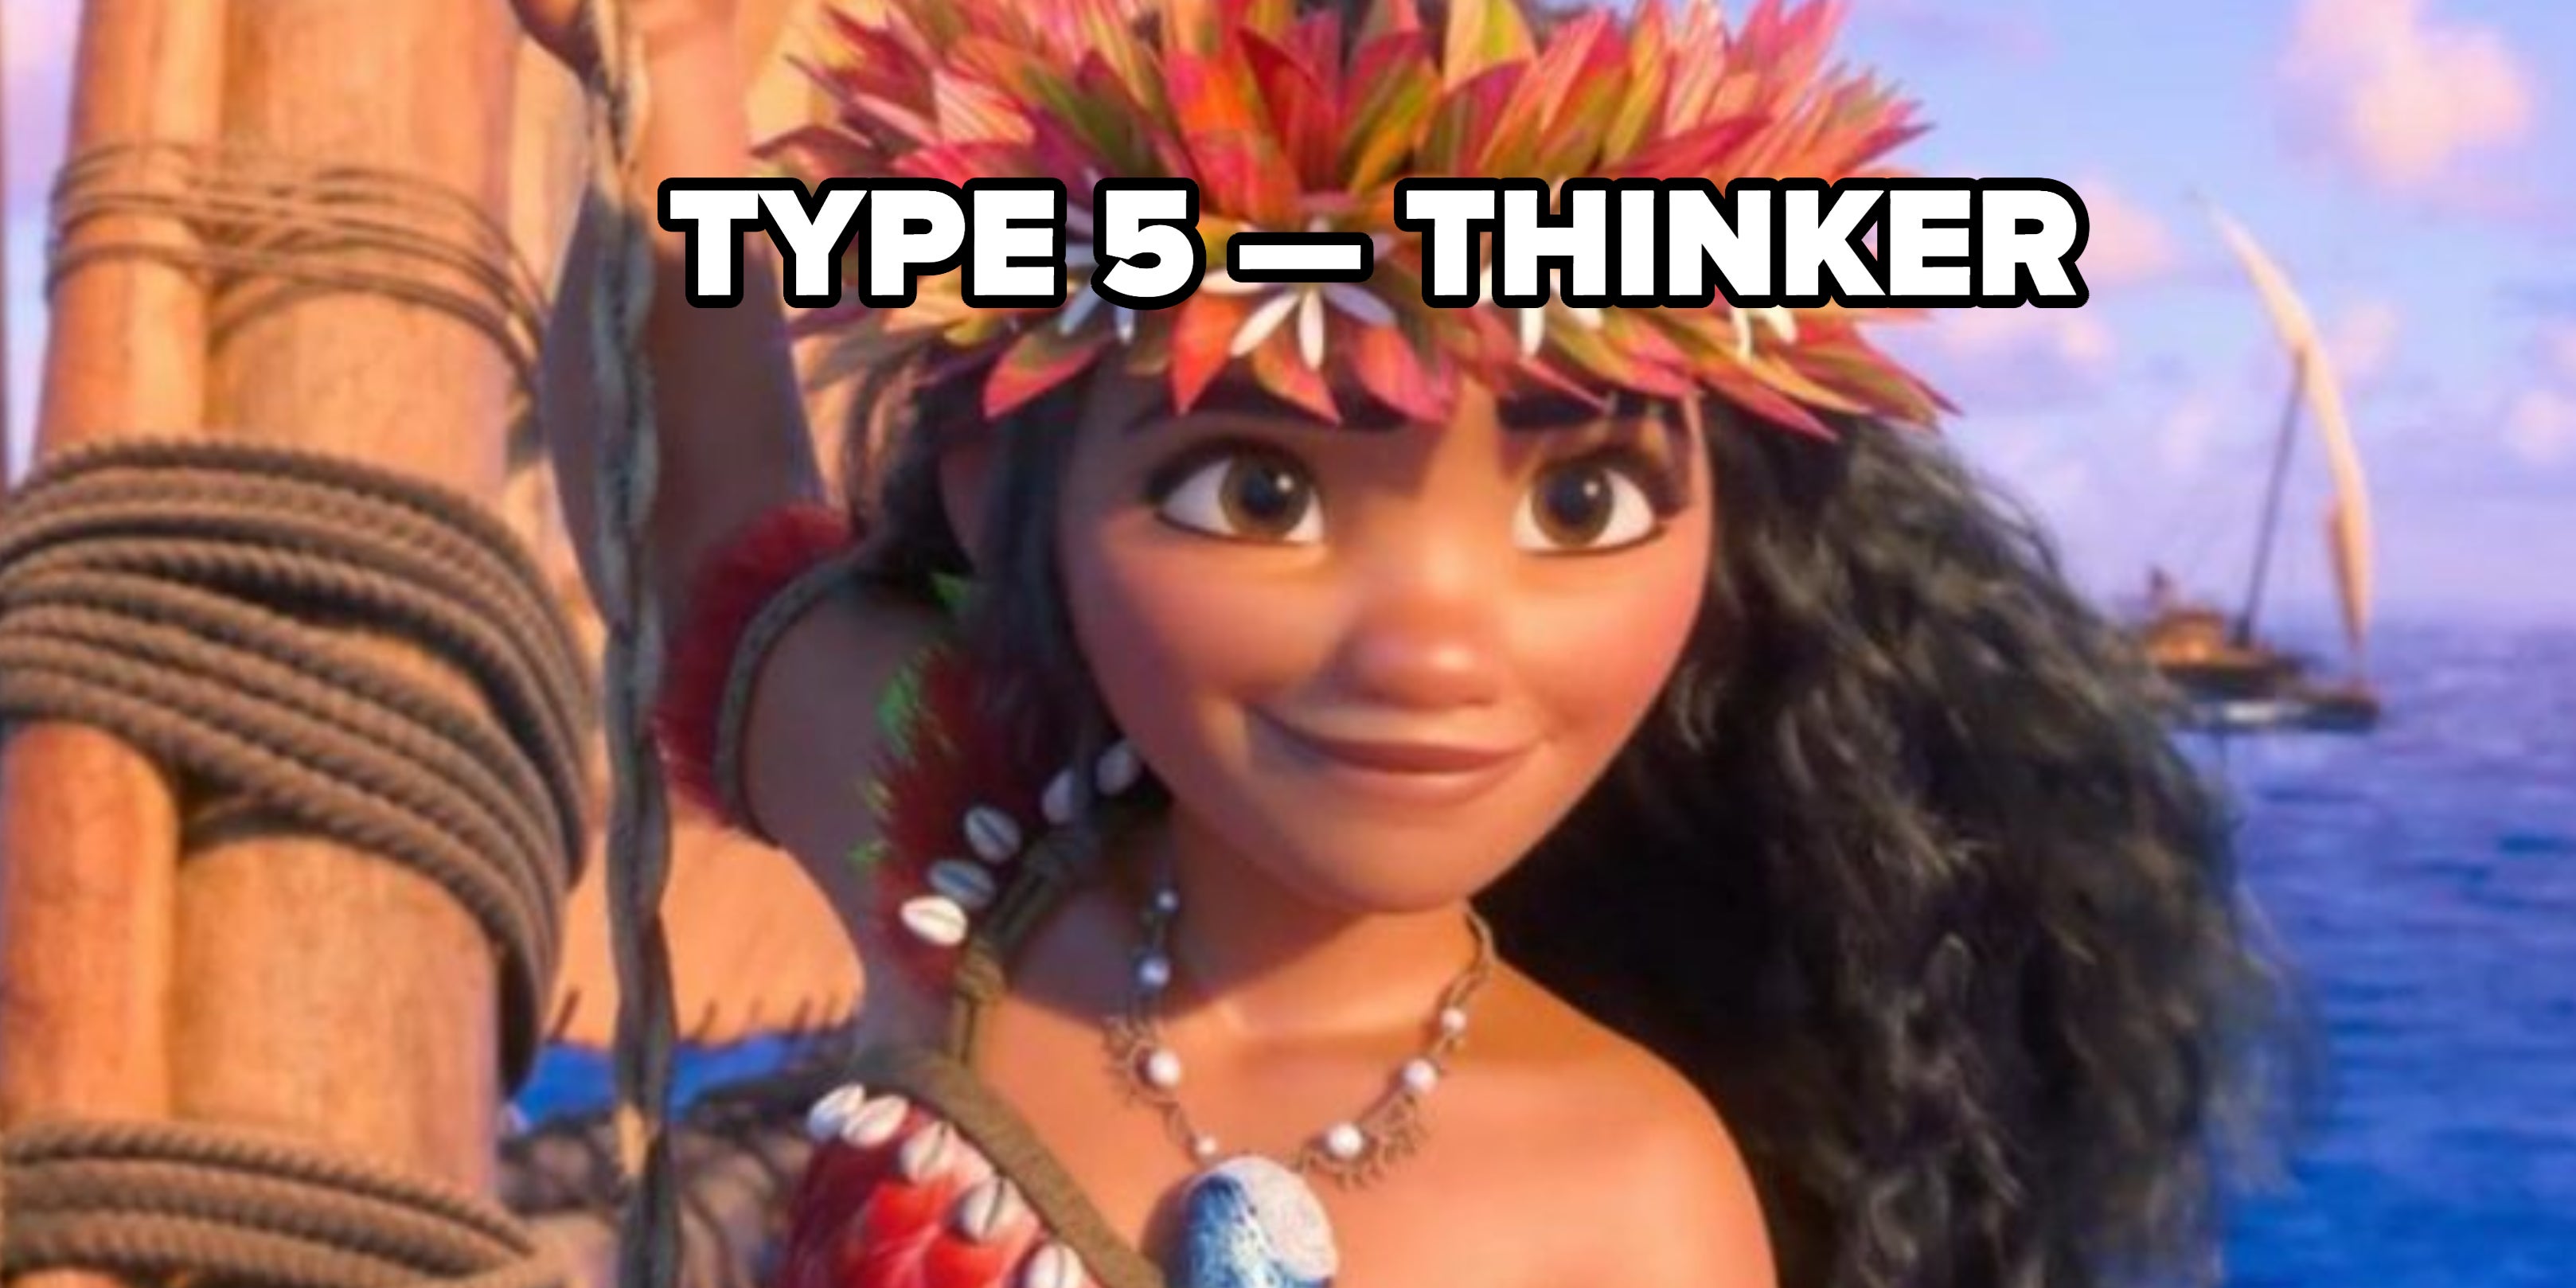 Which Disney Princess Are You Based On The Personality Type?